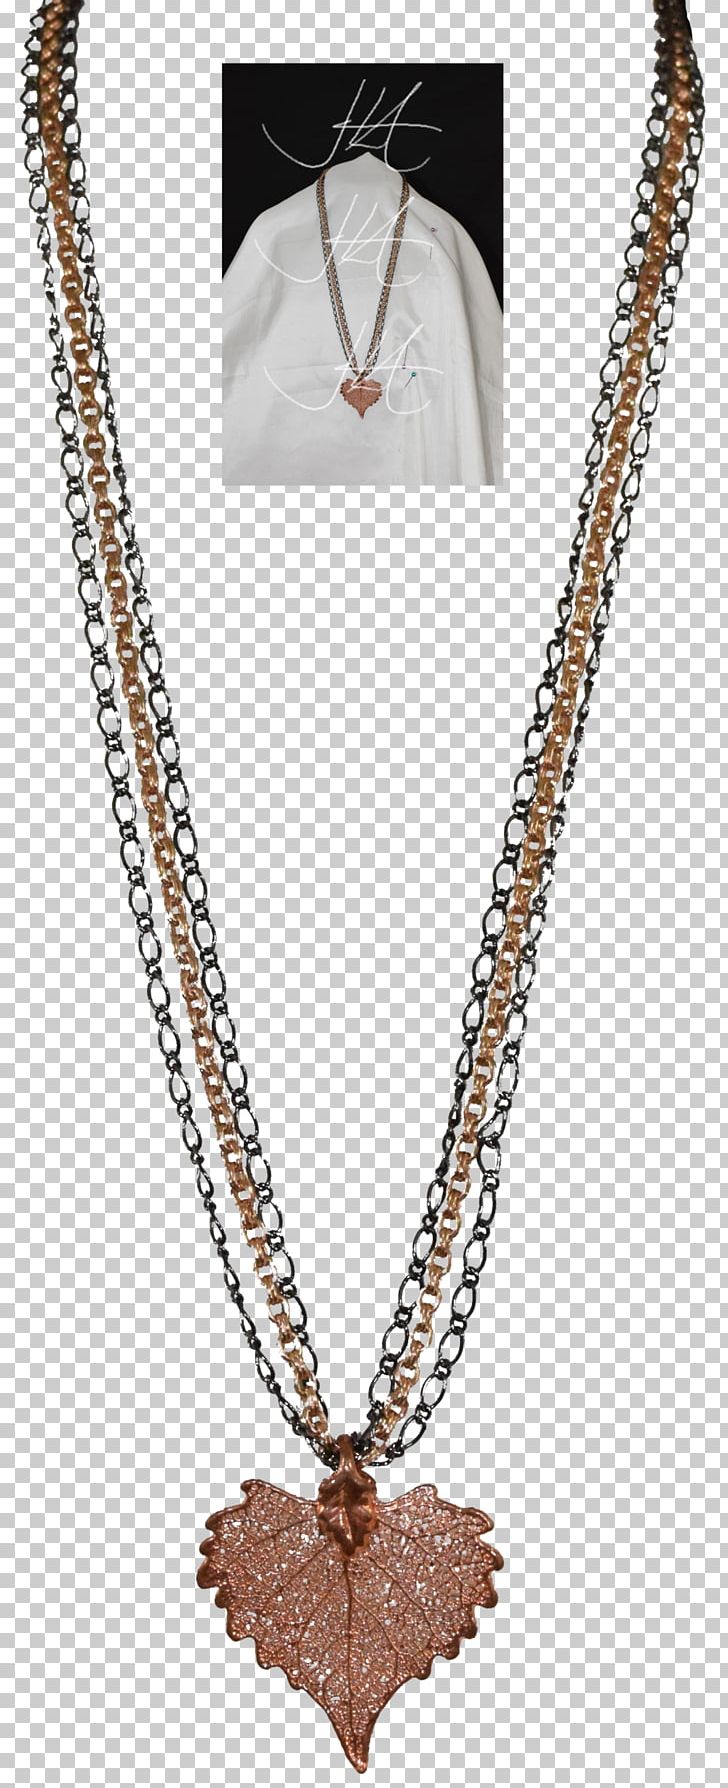 Jewellery Necklace Charms & Pendants Clothing Accessories Chain PNG, Clipart, Art, Artist, Body Jewelry, Chain, Charms Pendants Free PNG Download